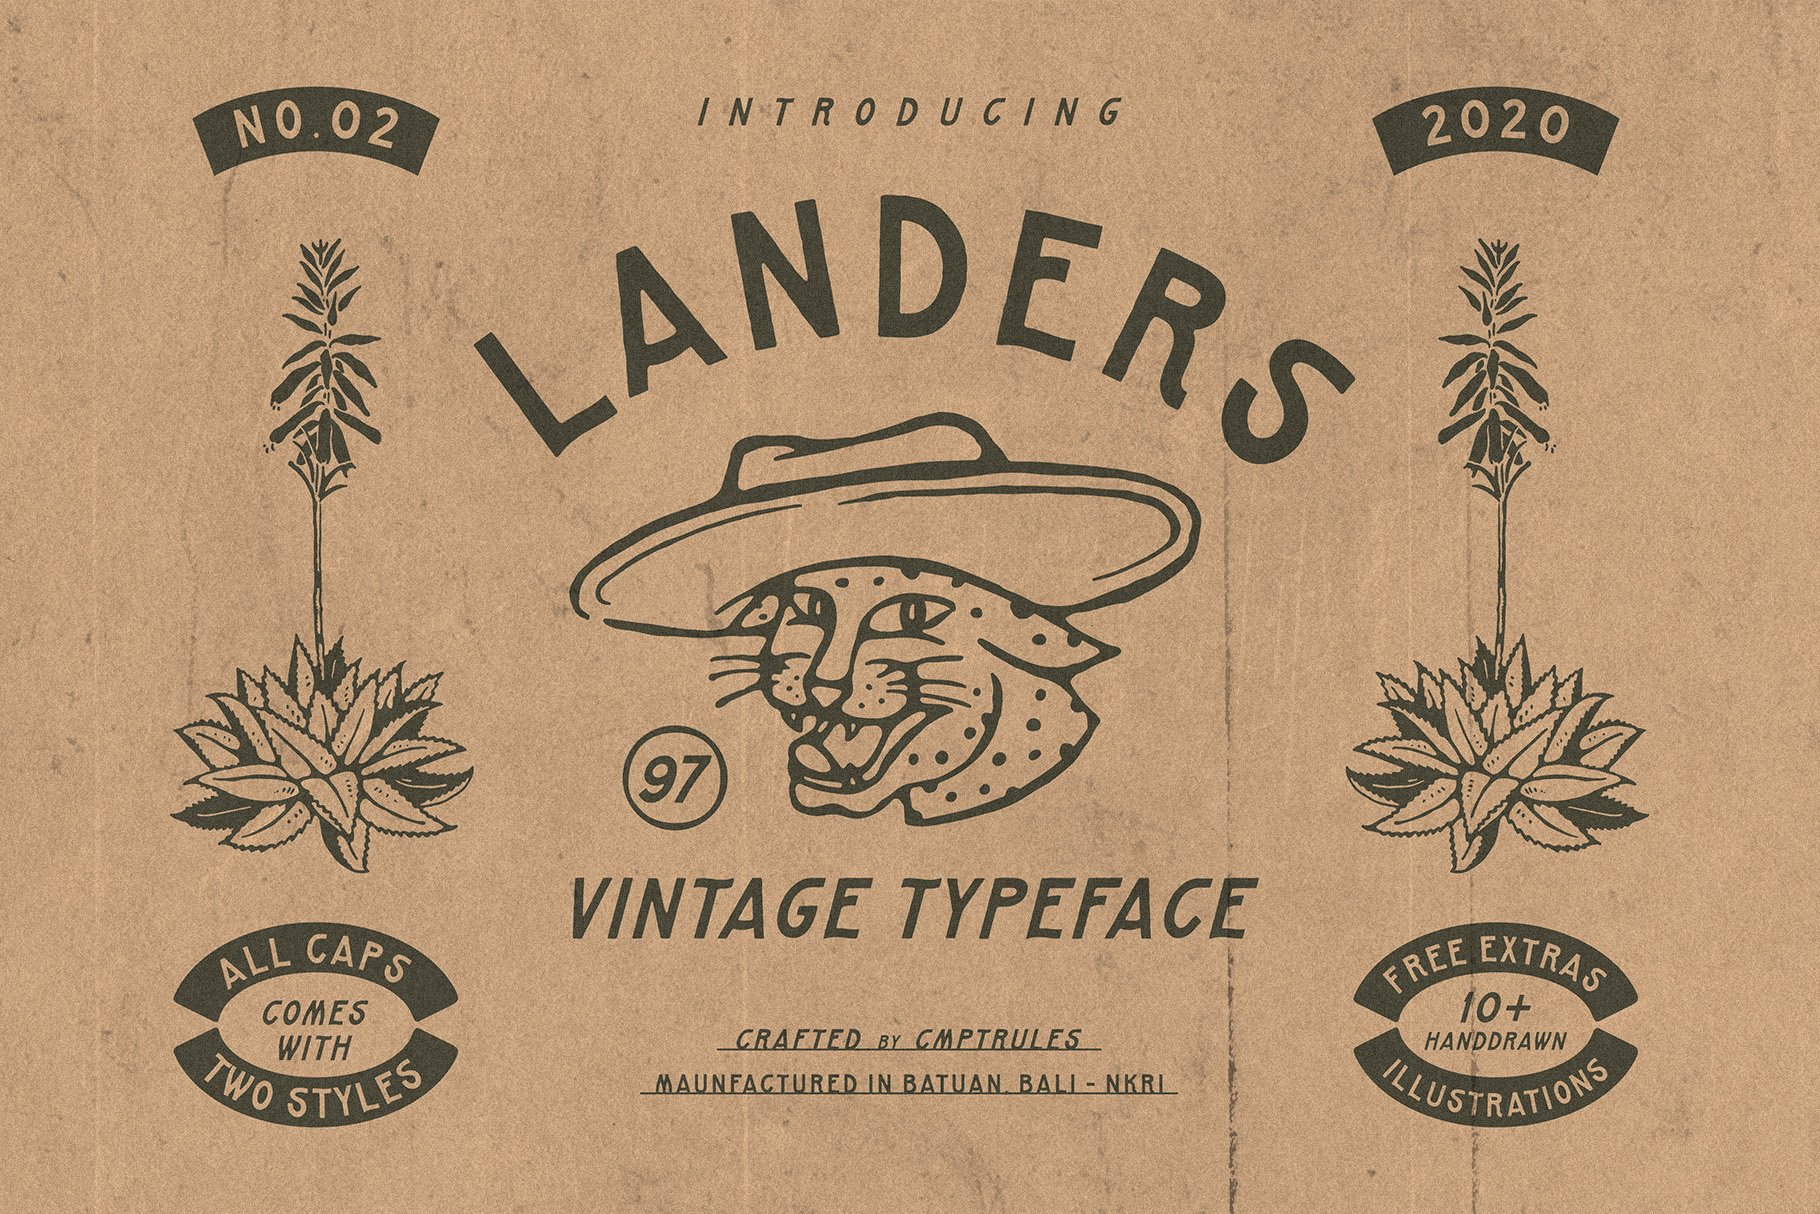 LANDERS DISPLAY TYPEFACE cover image.